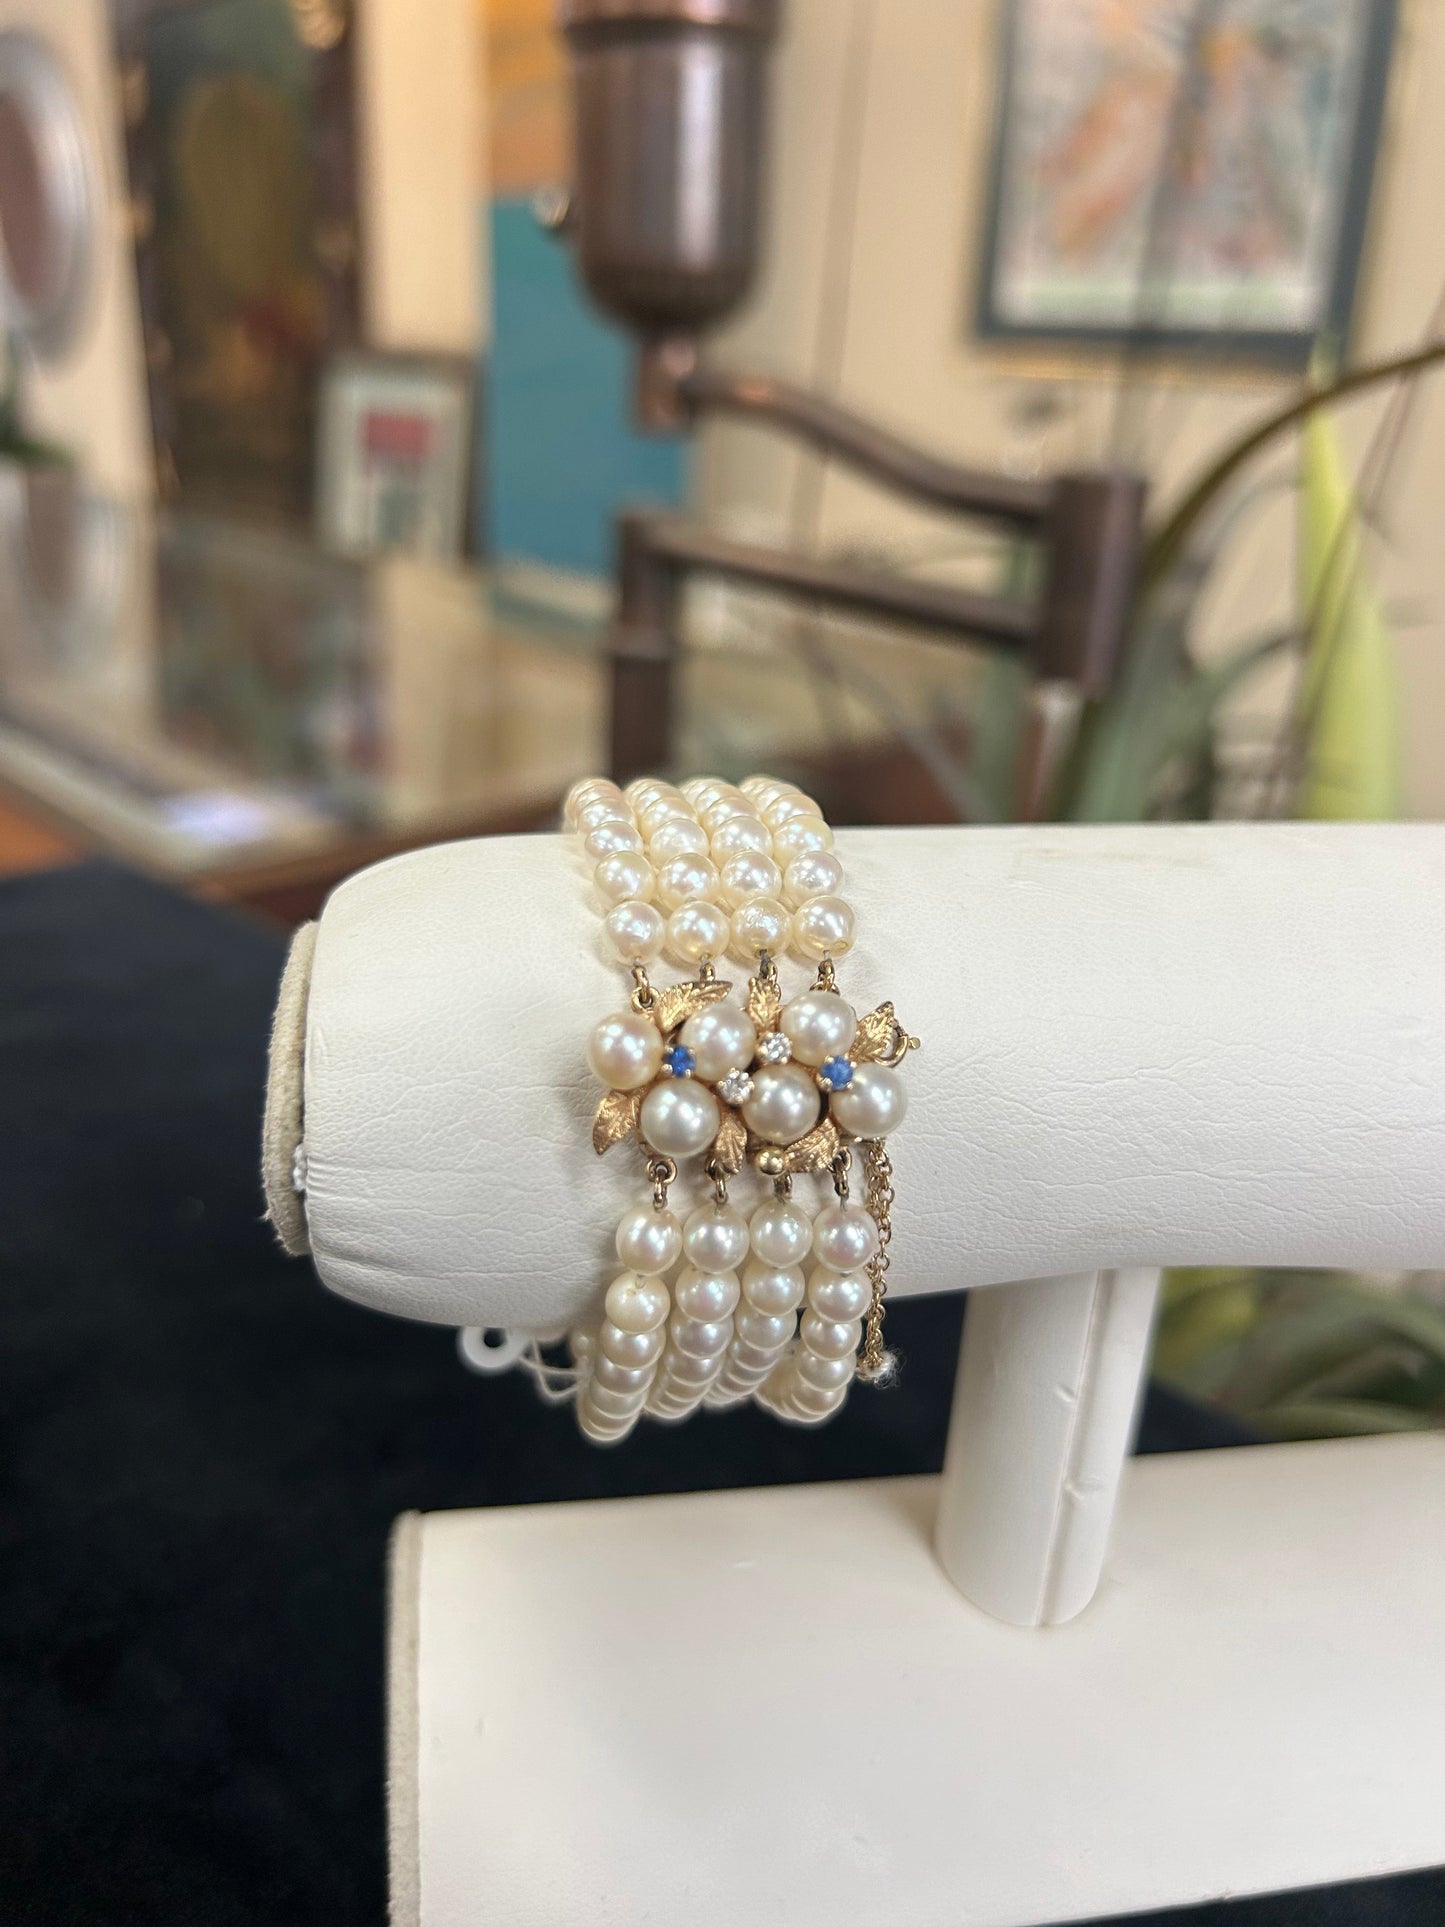 Four Strand Pearl Bracelet with Sapphires and Diamonds